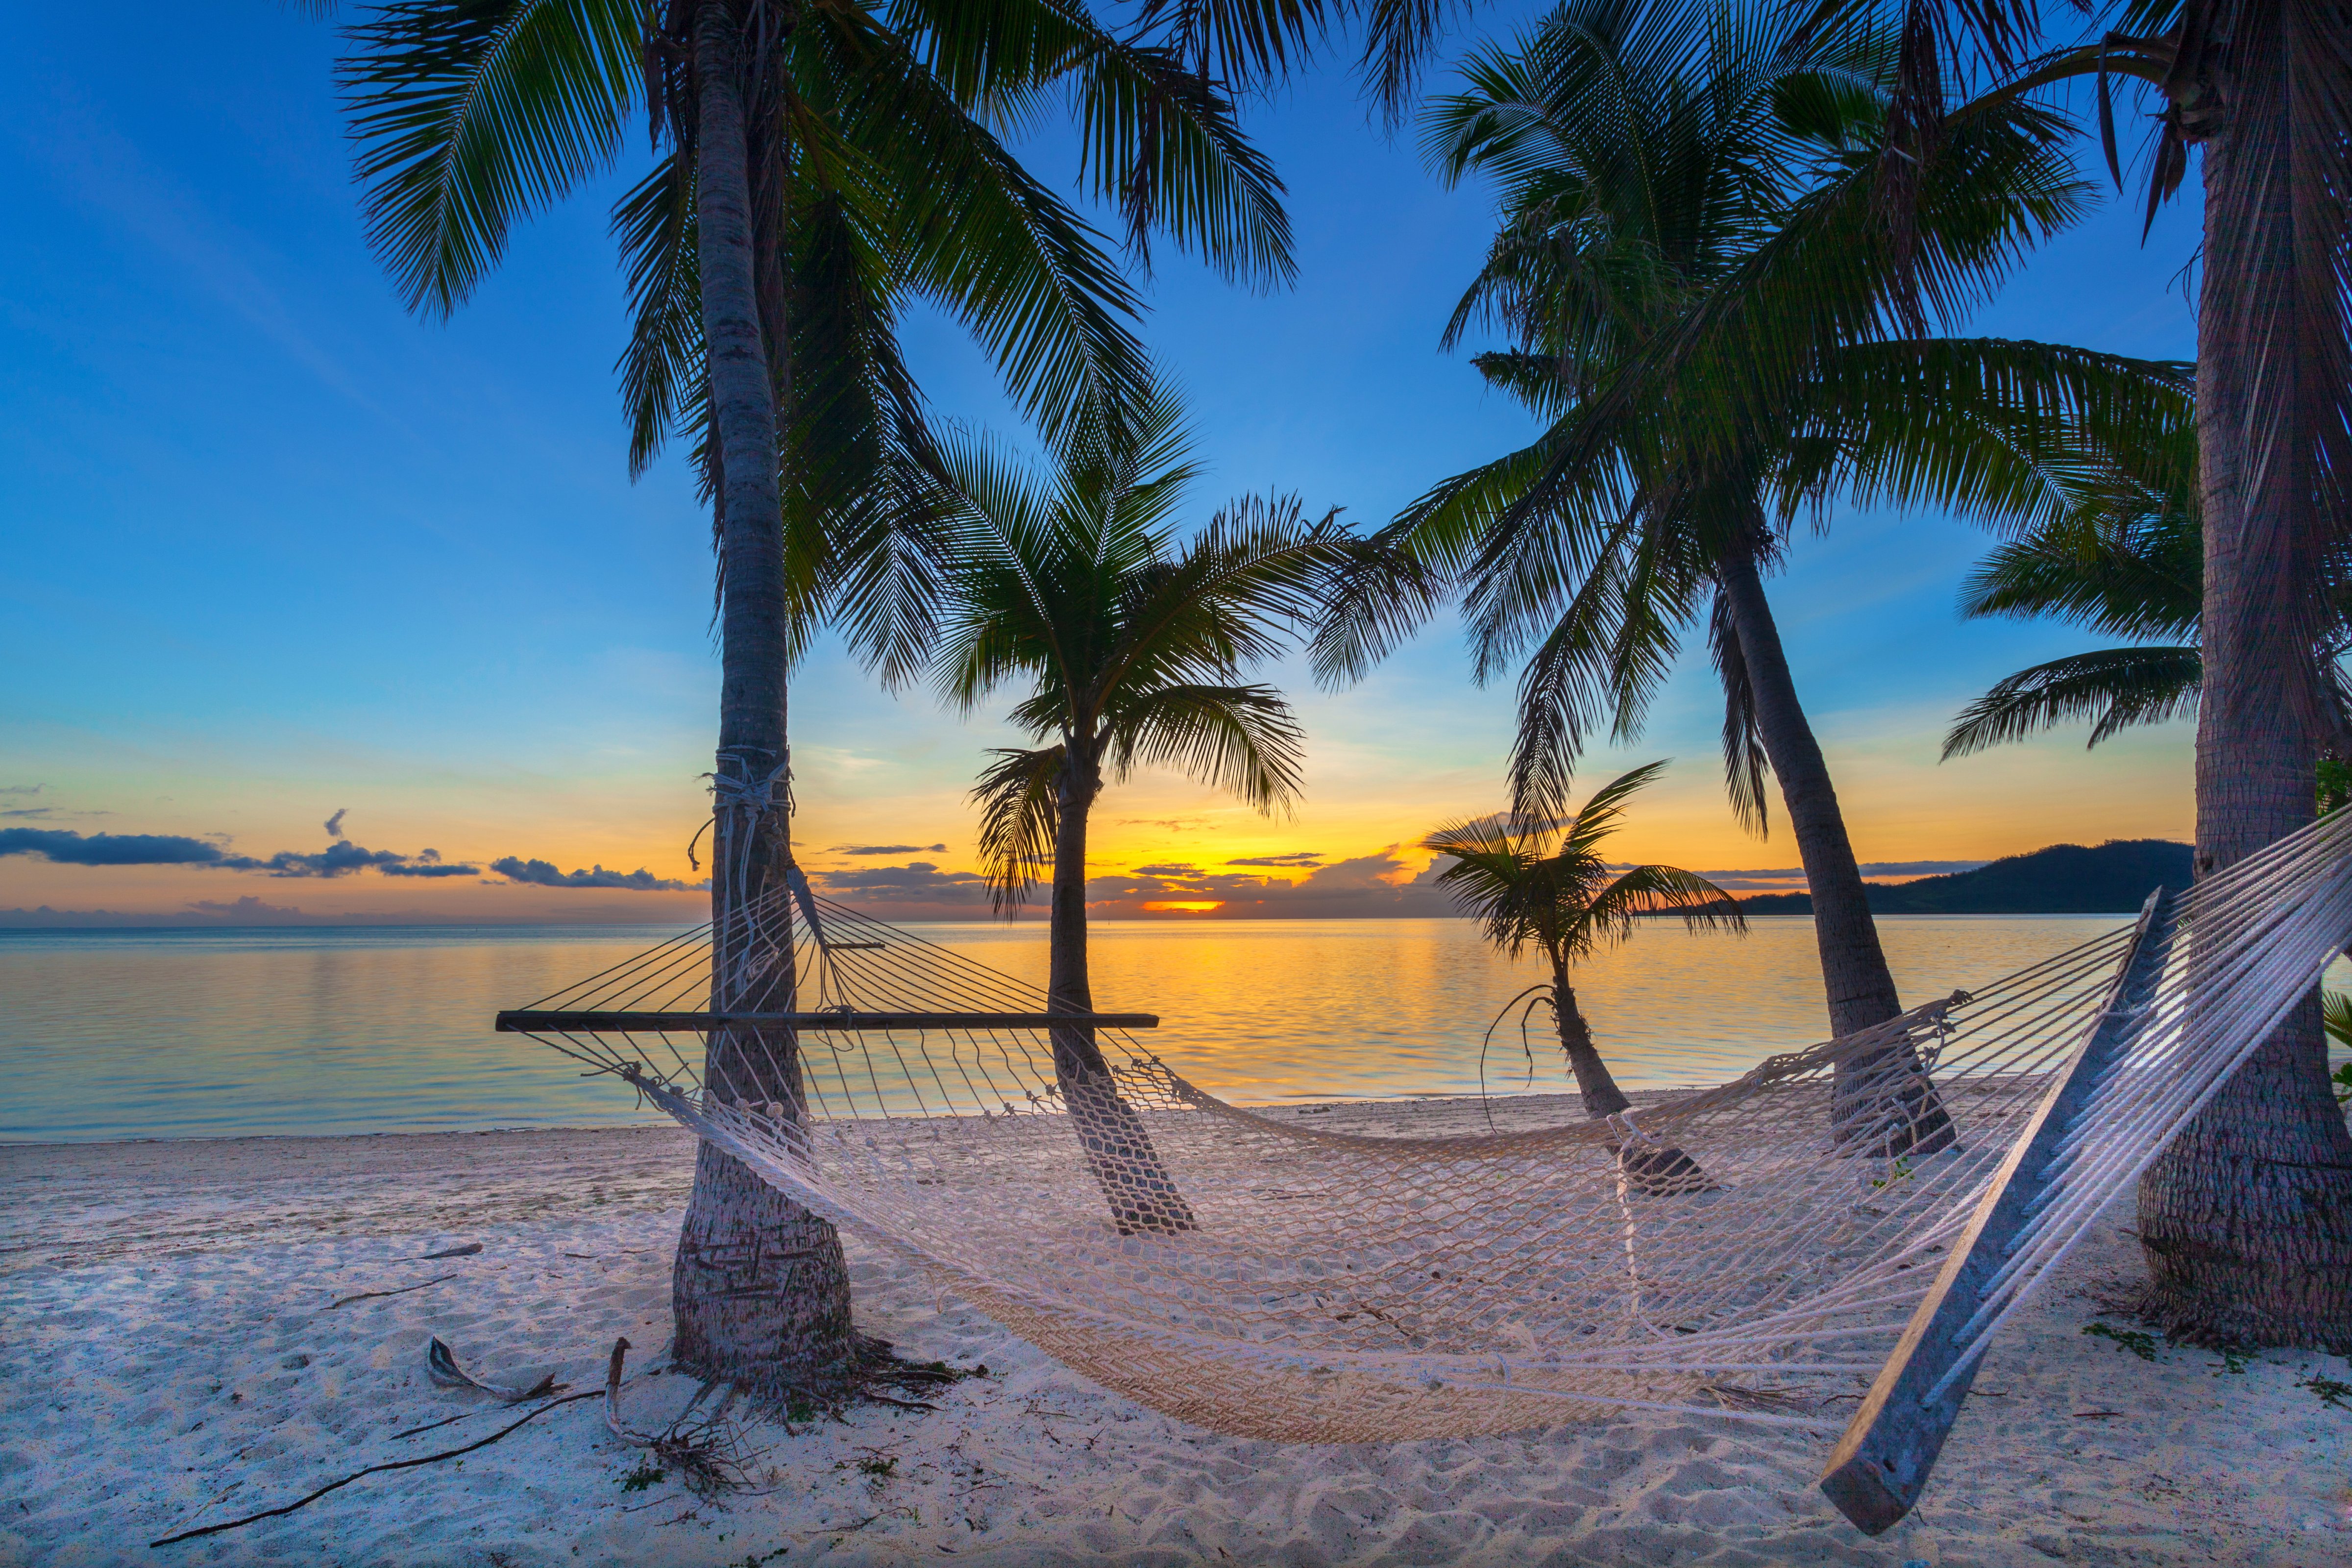 A beach at sunset in Fiji (Getty Images)